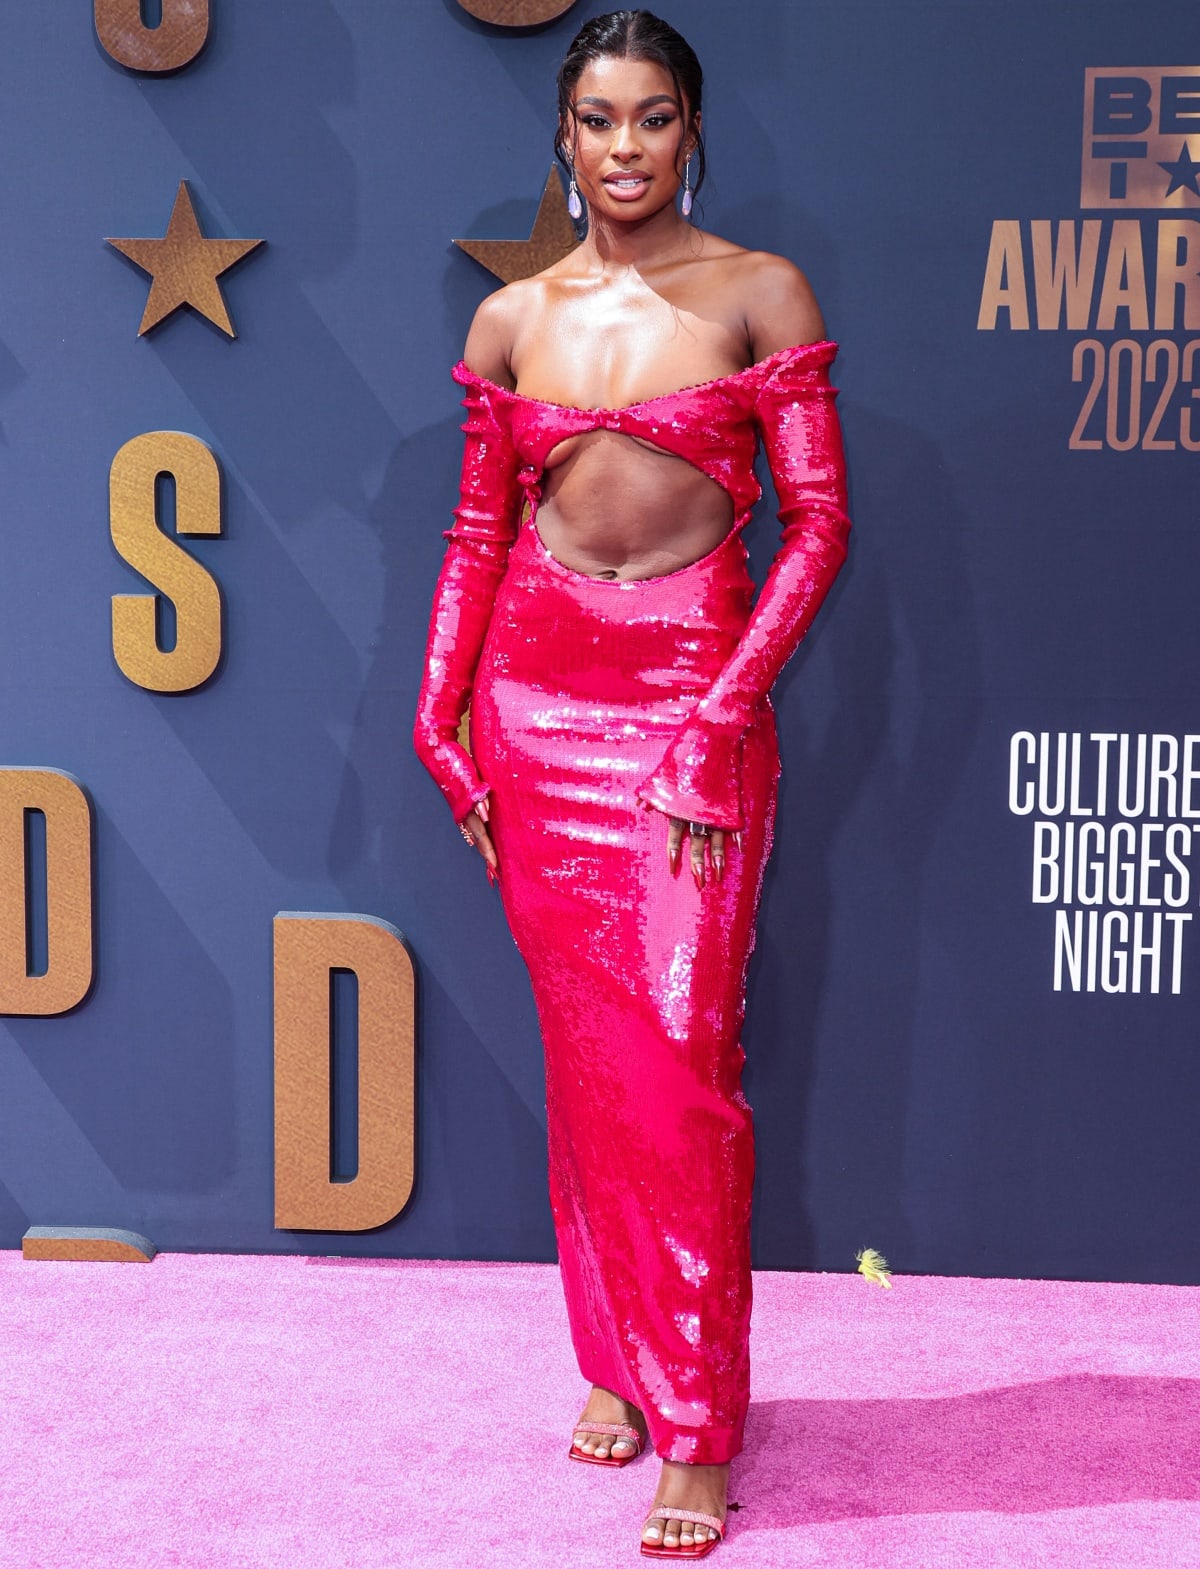 Coco Jones wearing a daring scarlet gown from LaQuan Smith’s Spring 2023 collection at the 2023 BET Awards